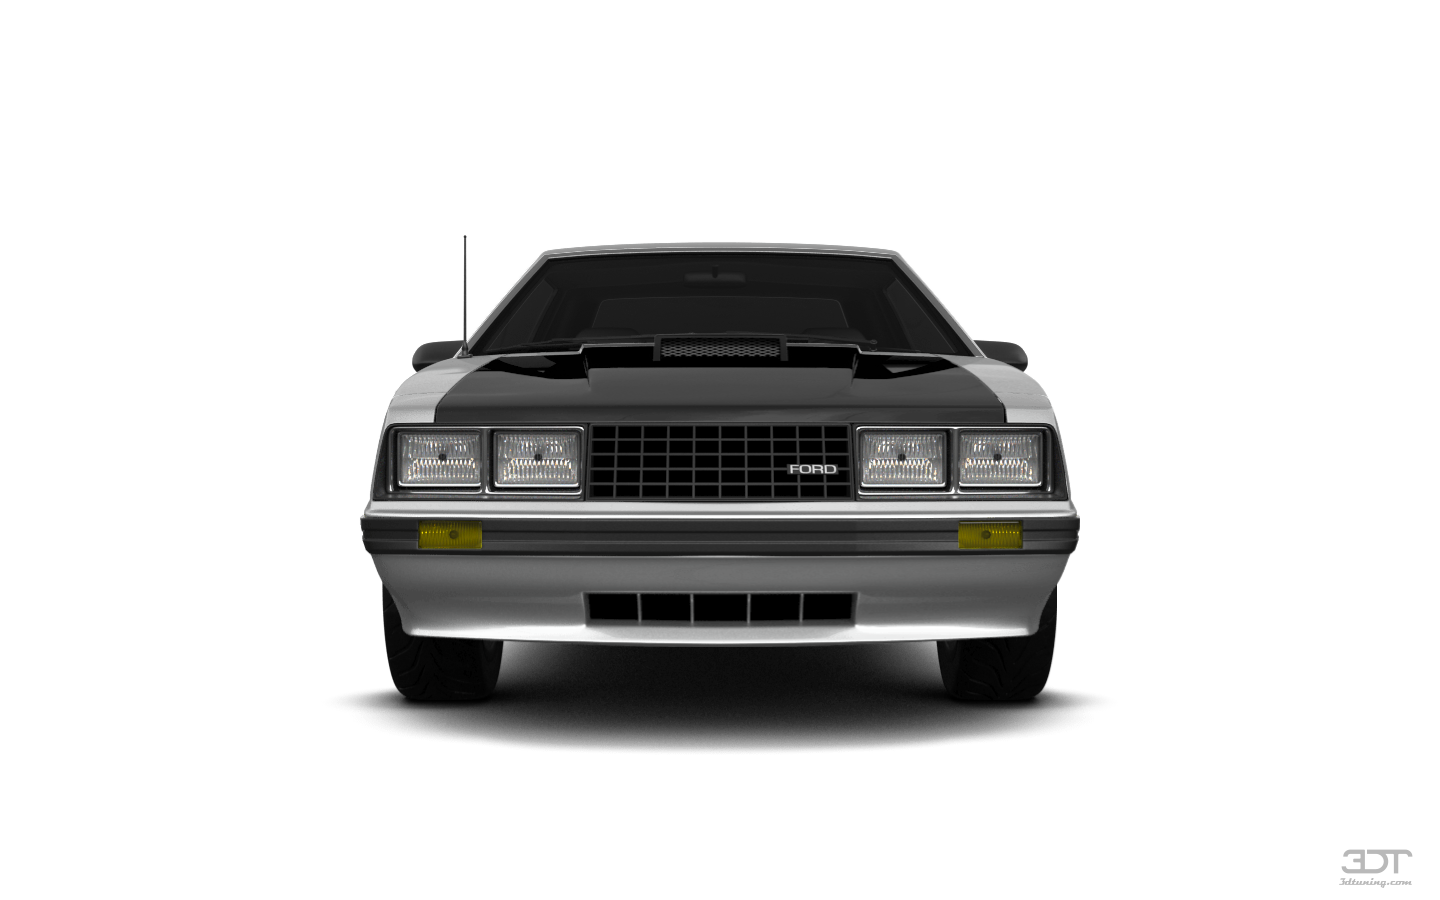 Ford Mustang Hatchback 1980 tuning